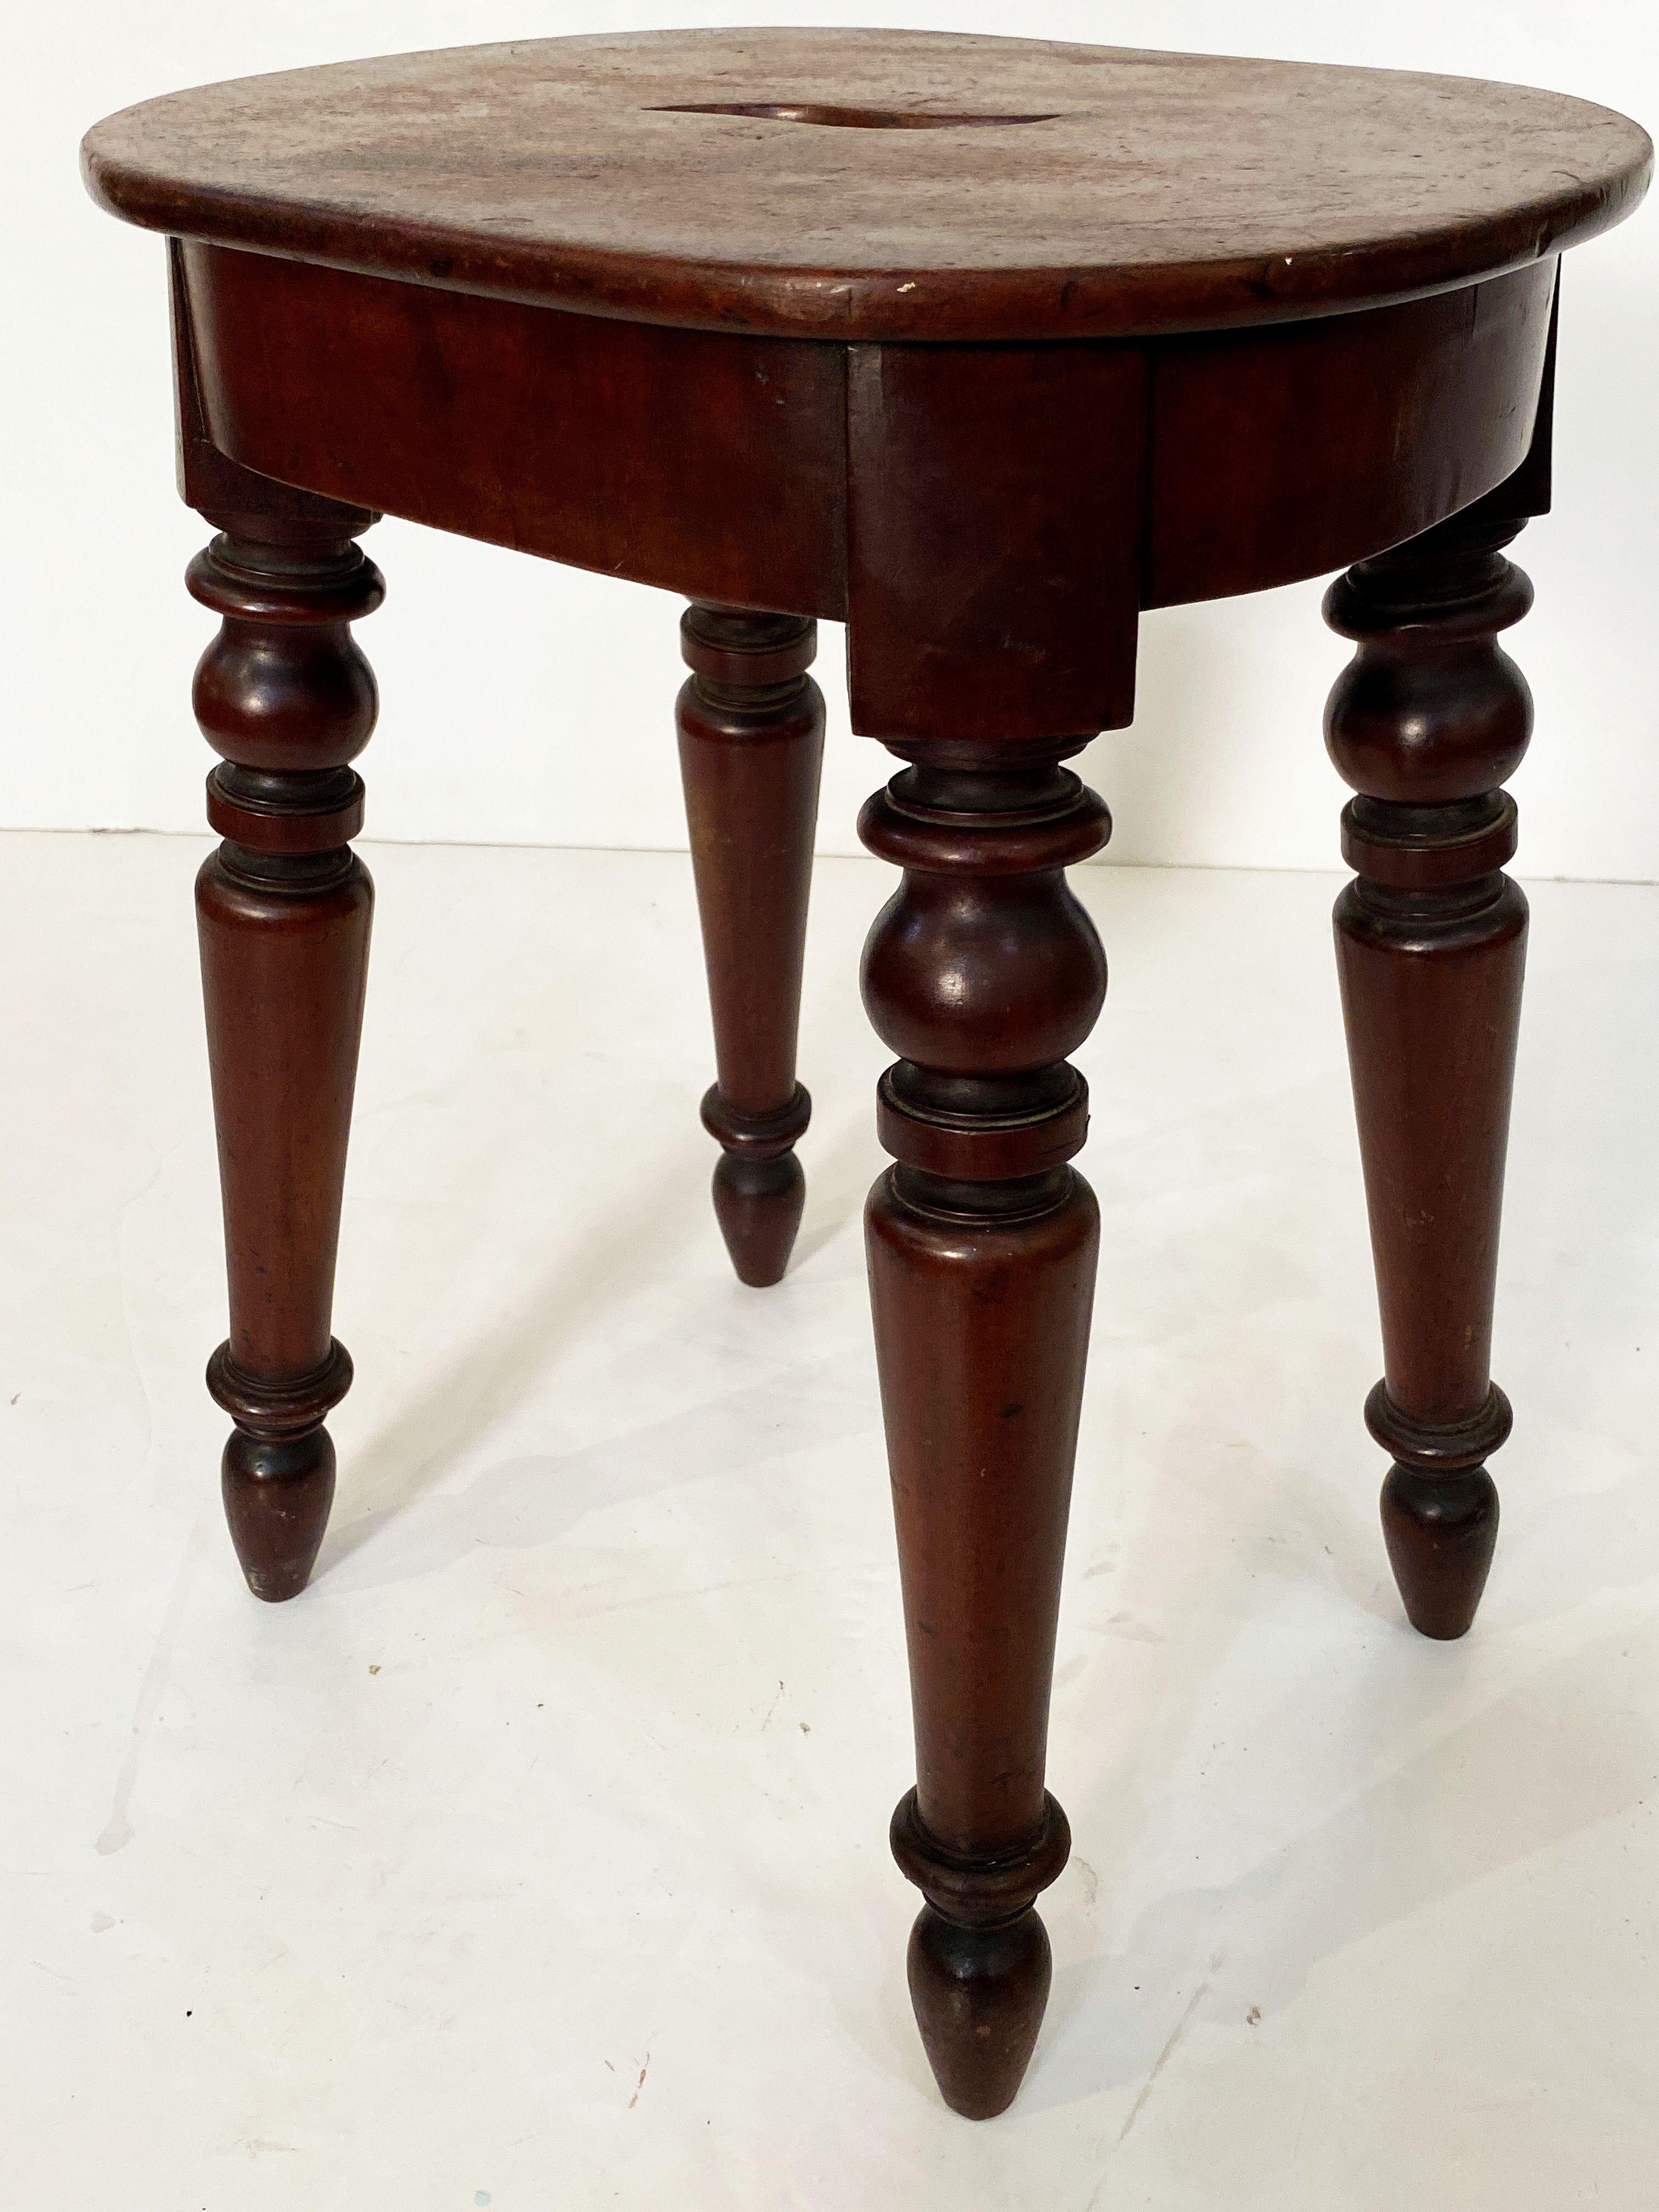 English Stool of Mahogany with Oval Seat and Turned Legs For Sale 5